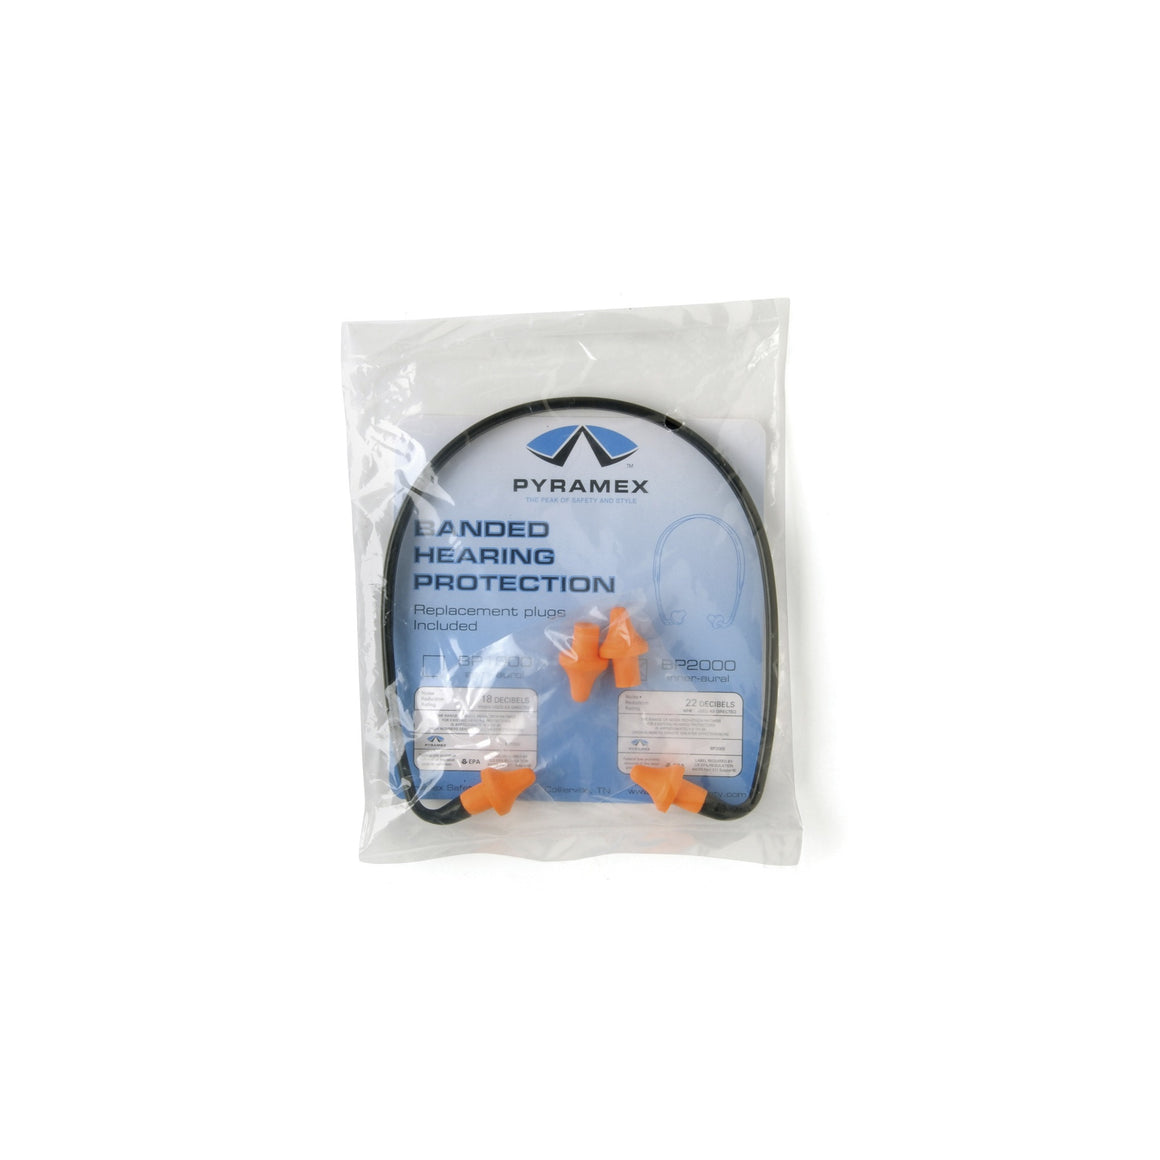 BP2000 - Hearing Protection Banded Conical earplugs with replacement pads 40 pair/box